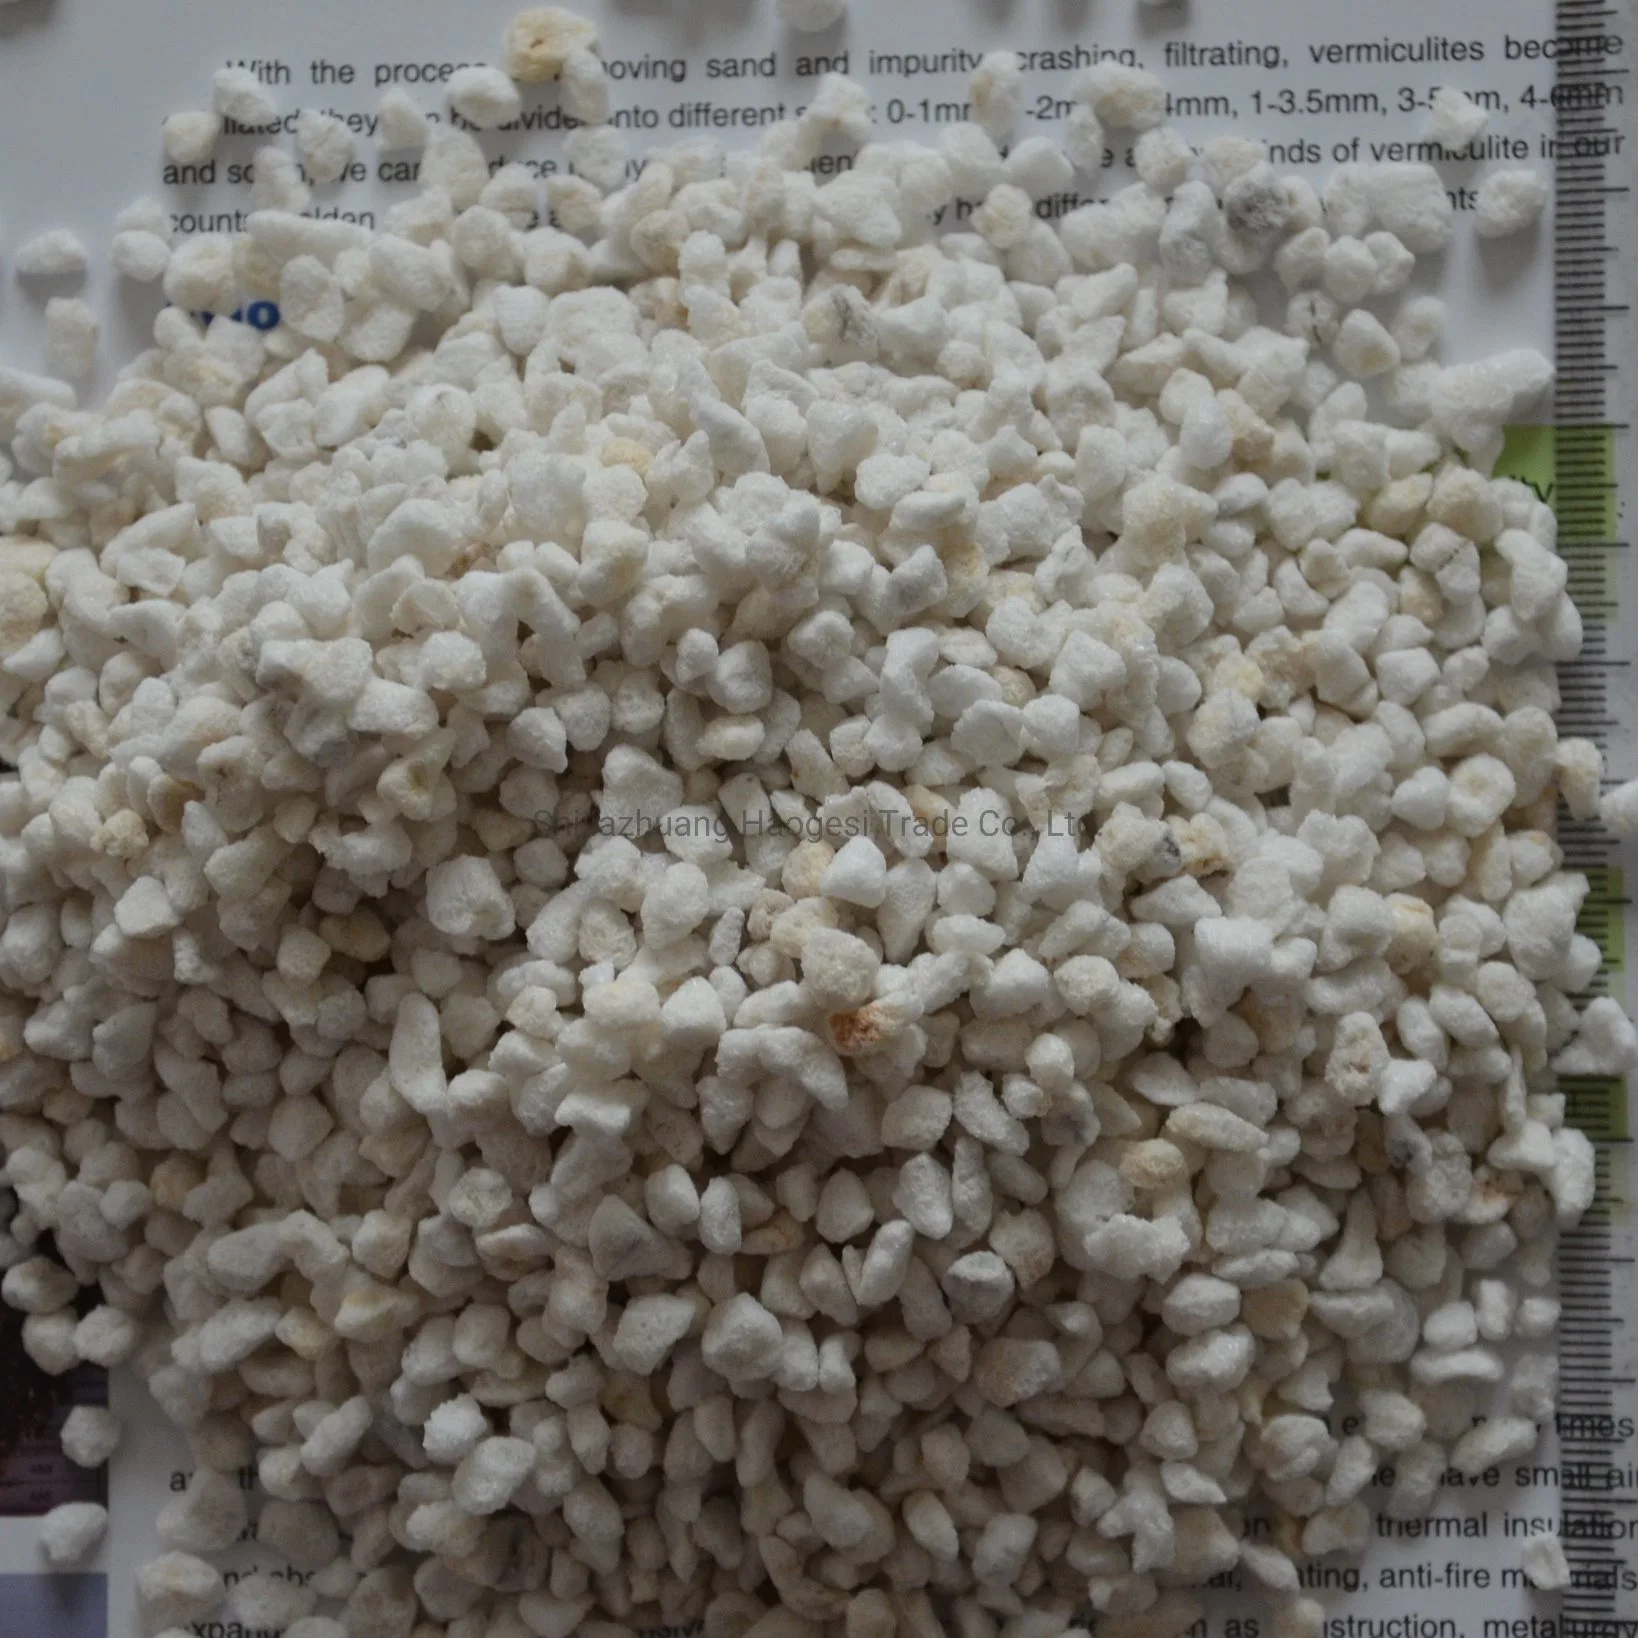 Supply Soilless Matrix Soil Improver Agriculture and Horticulture Used Expanded Perlite 1-3mm 2-4mm 3-6mm 4-8mm 5-10mm